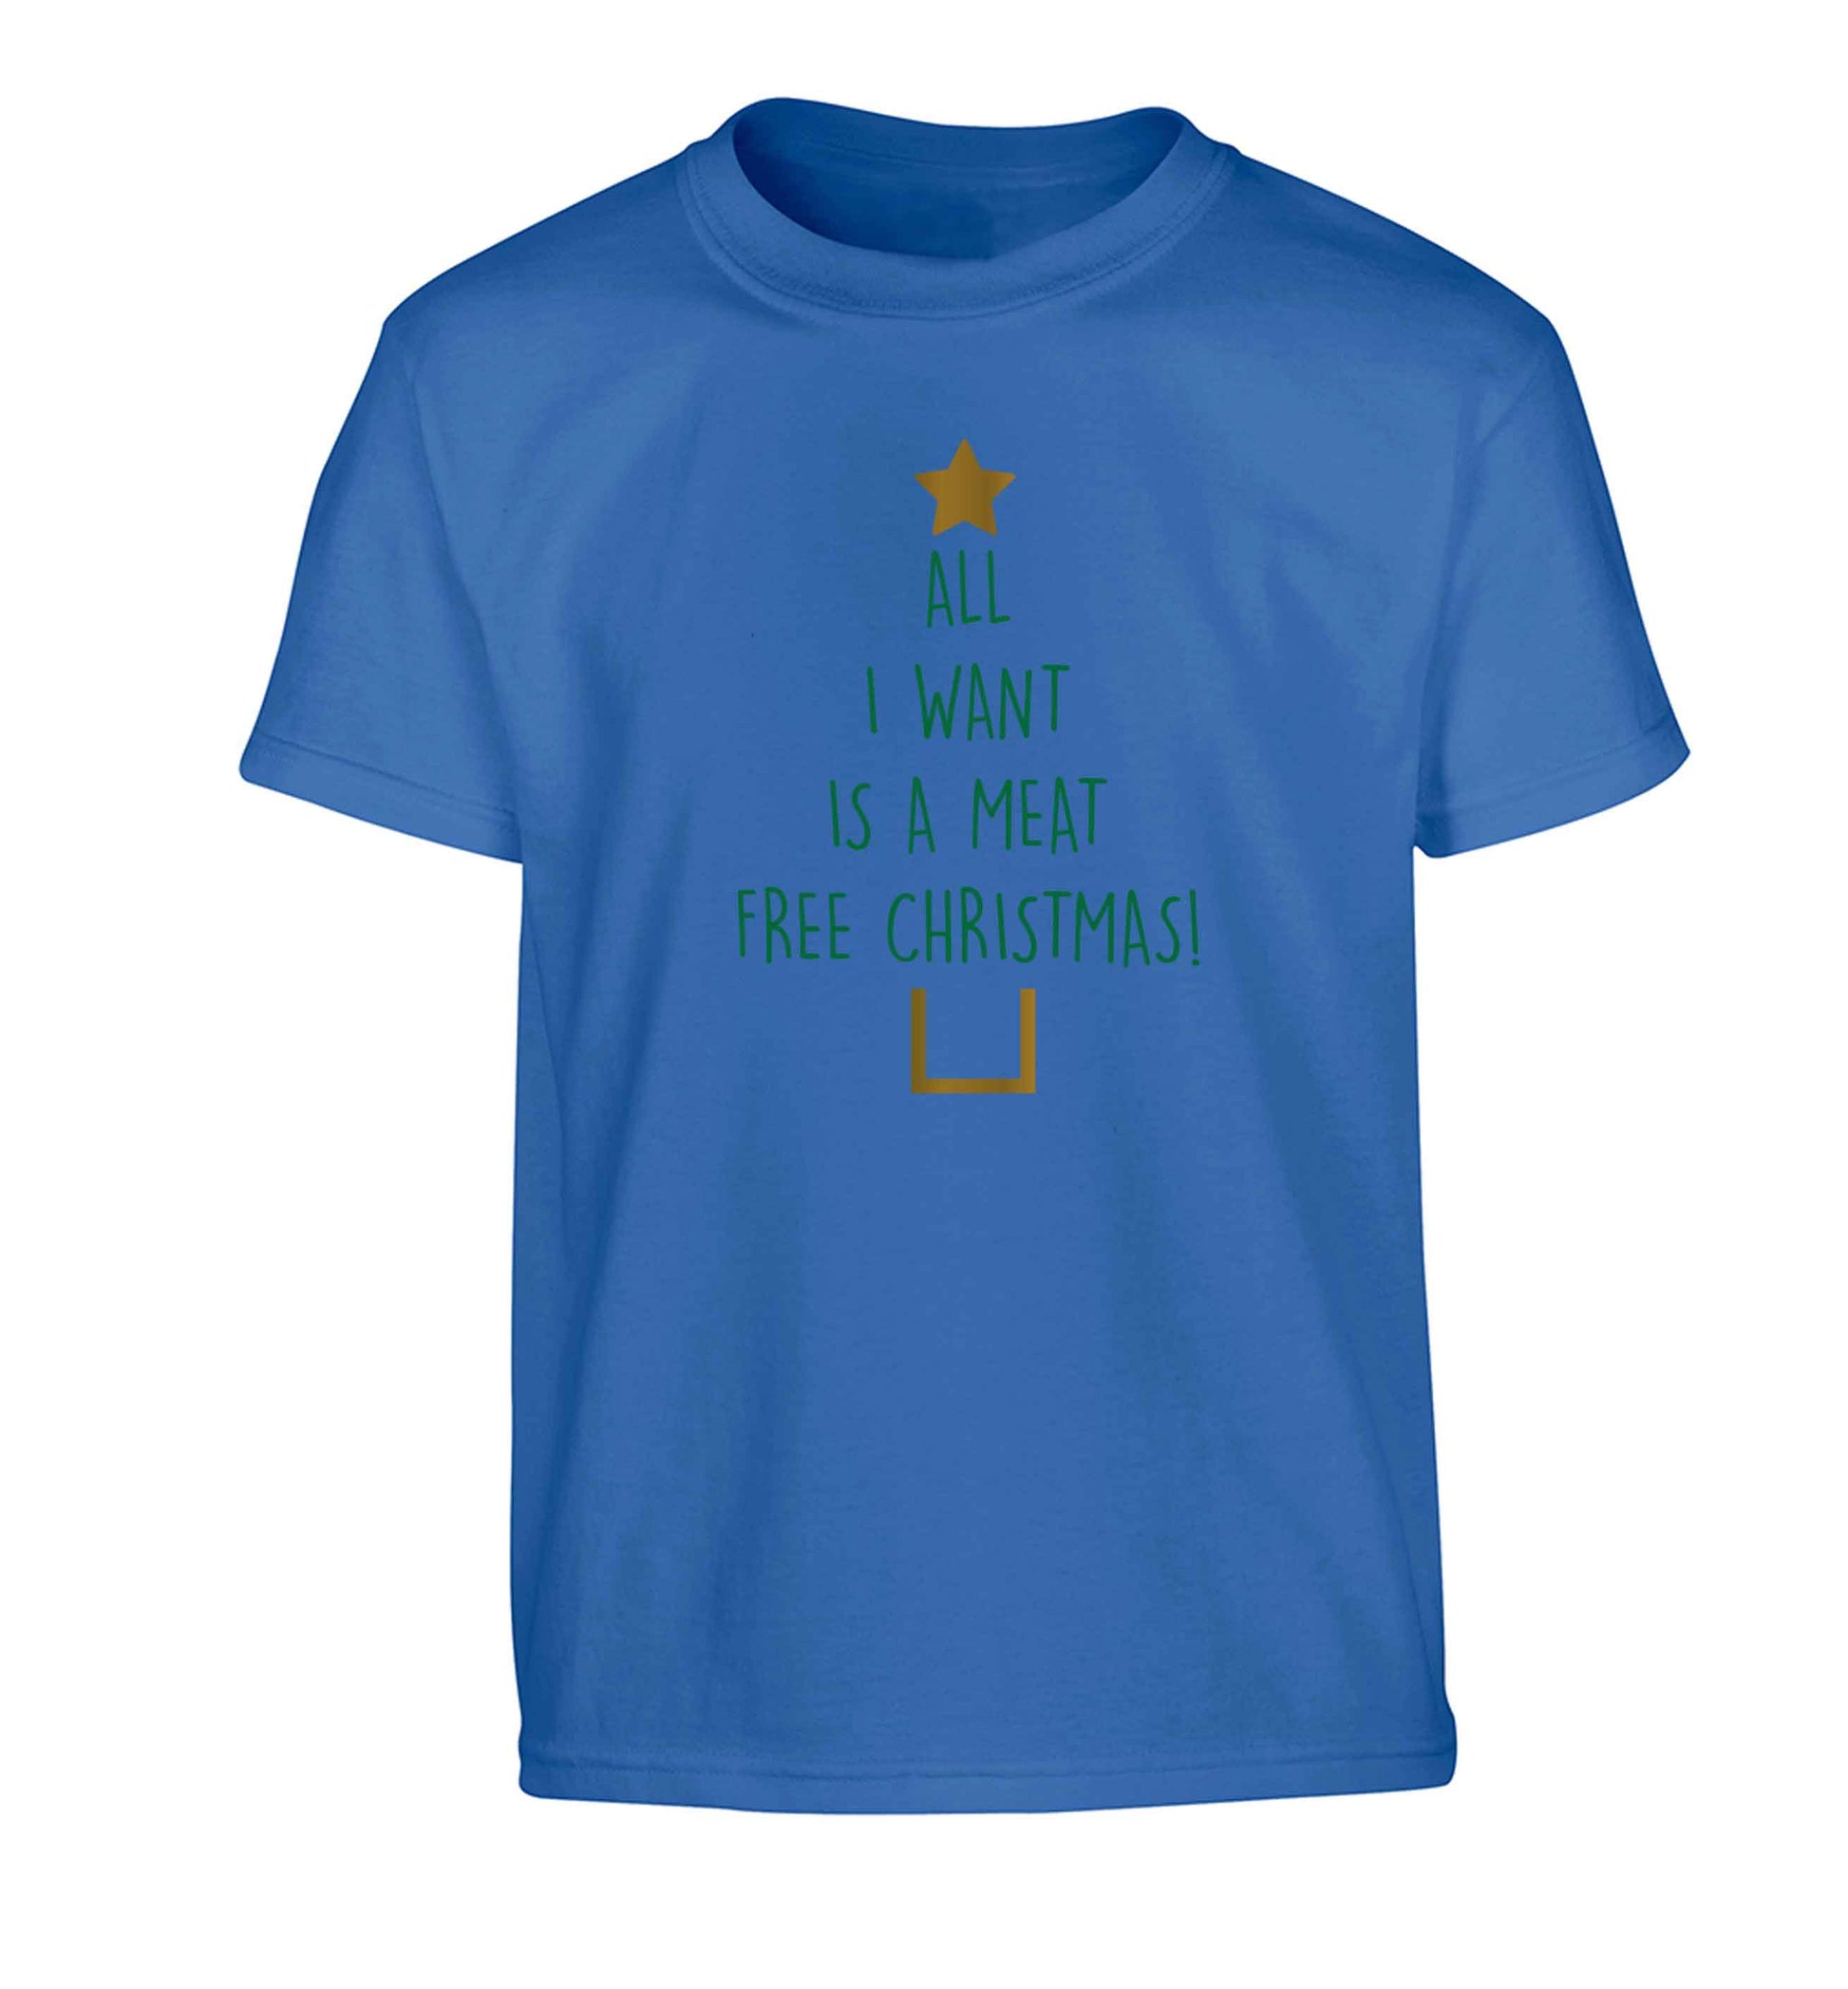 All I want is a meat free Christmas Children's blue Tshirt 12-13 Years